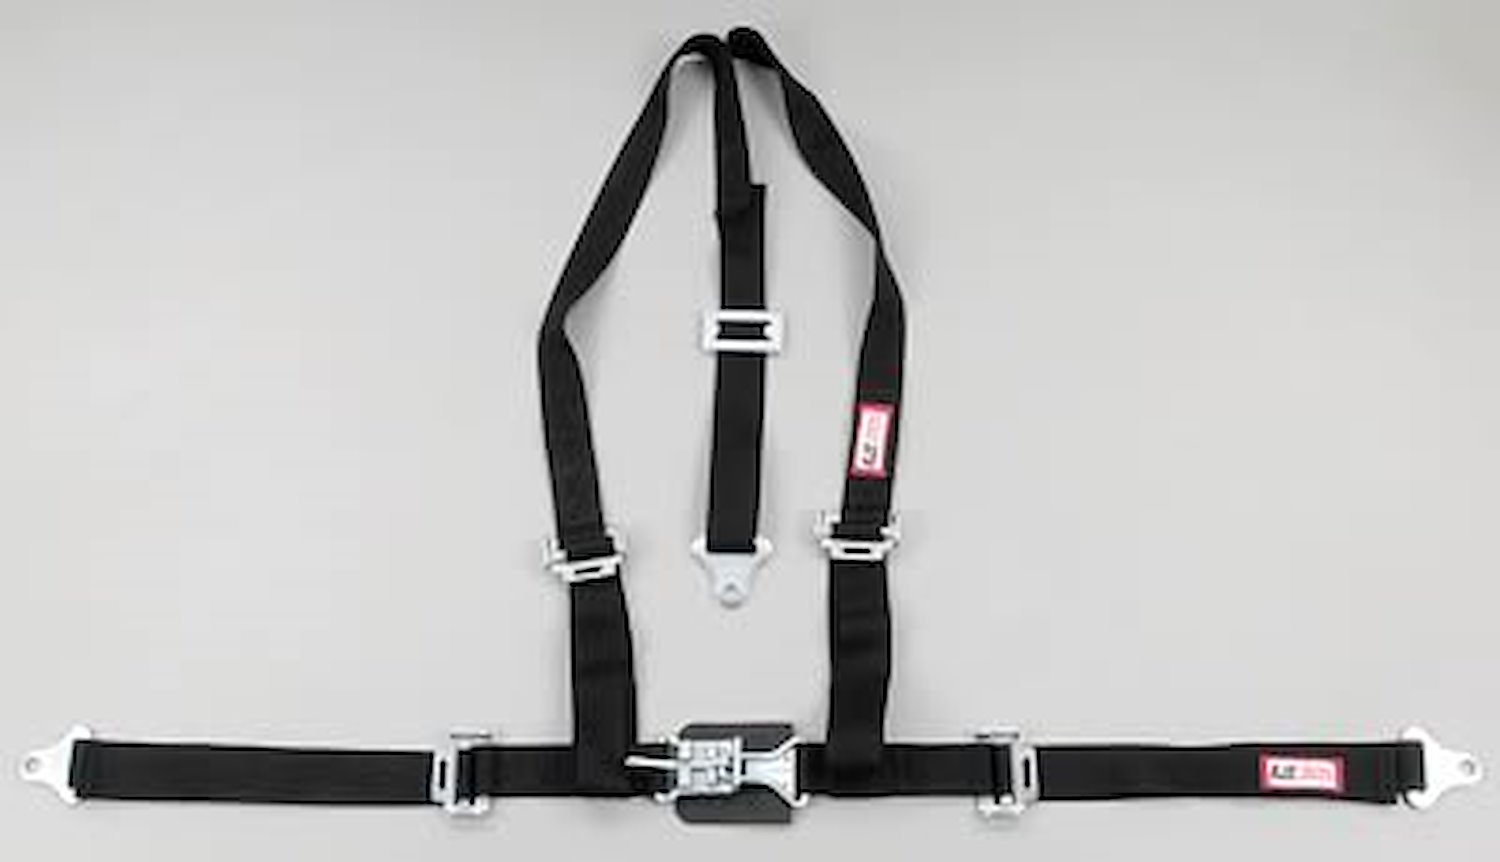 NON-SFI L&L HARNESS 2 PULL UP Lap Belt BOLT SEWN IN SEWN IN 2 S.H. INDIVIDUAL FLOOR Mount WRAP/BOLT BLUE